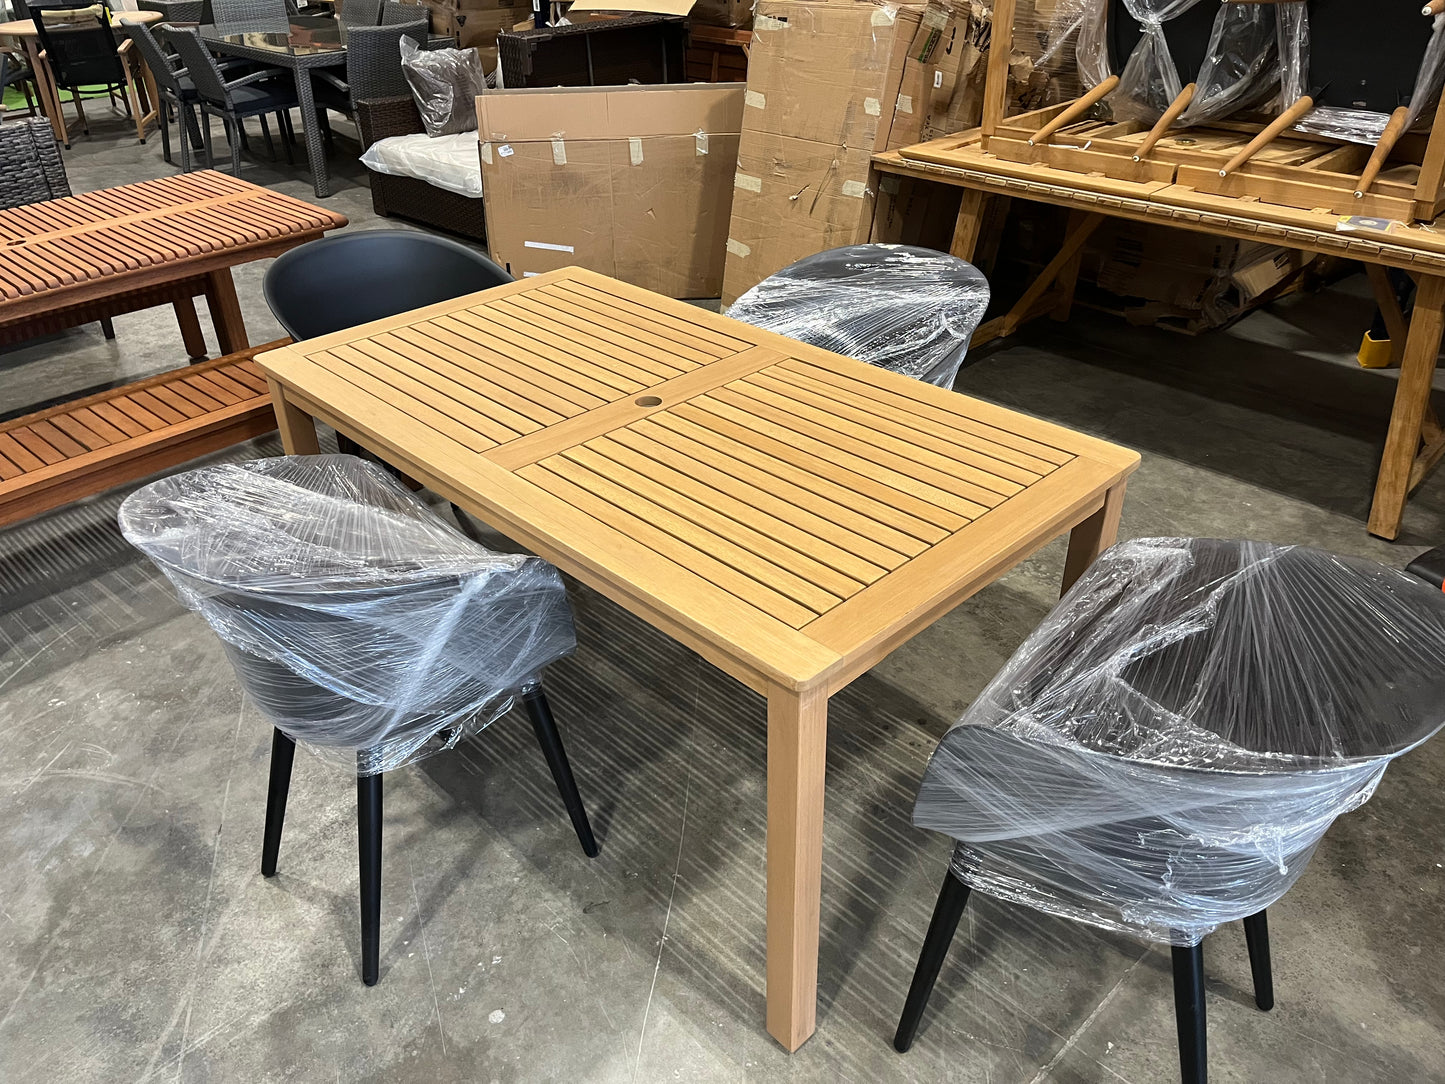 WAS $899 NOW $599 Open Box (never used) 5 Piece Rectangular 100% FSC Certified Solid Wood Table With Black Chairs Dining Set